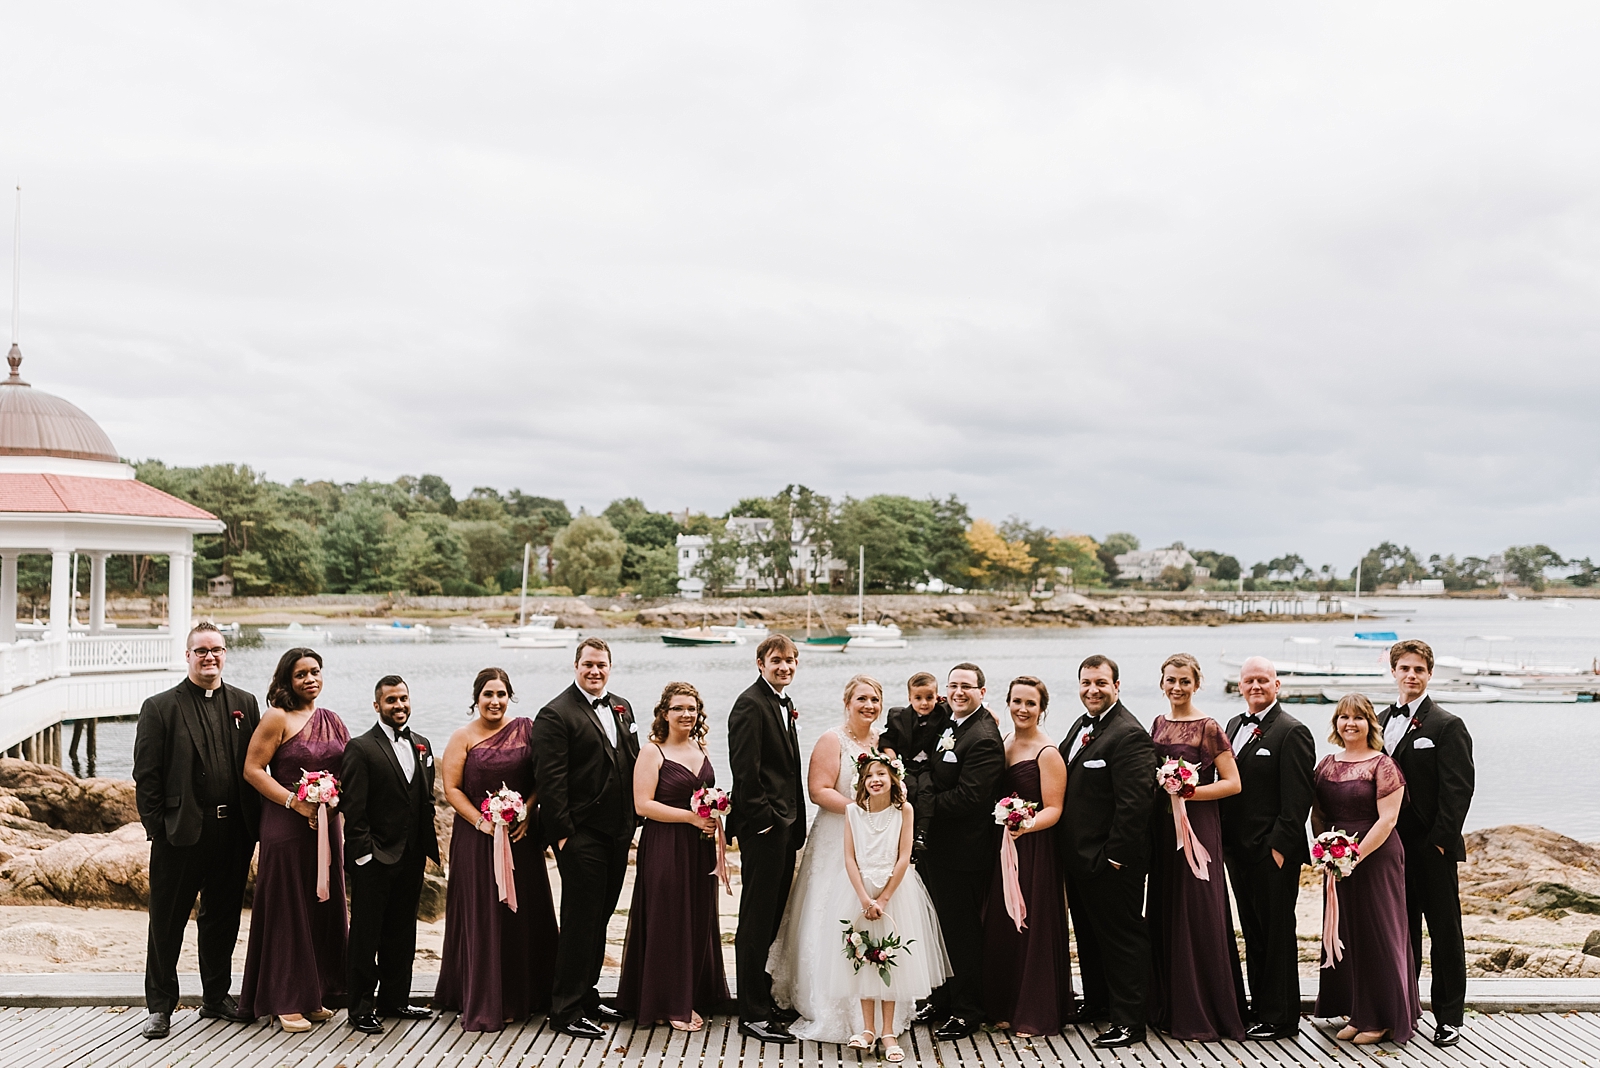 Summer Wedding at Beauport Hotel in Gloucester, MA by Boston Wedding Photographer Annmarie Swift